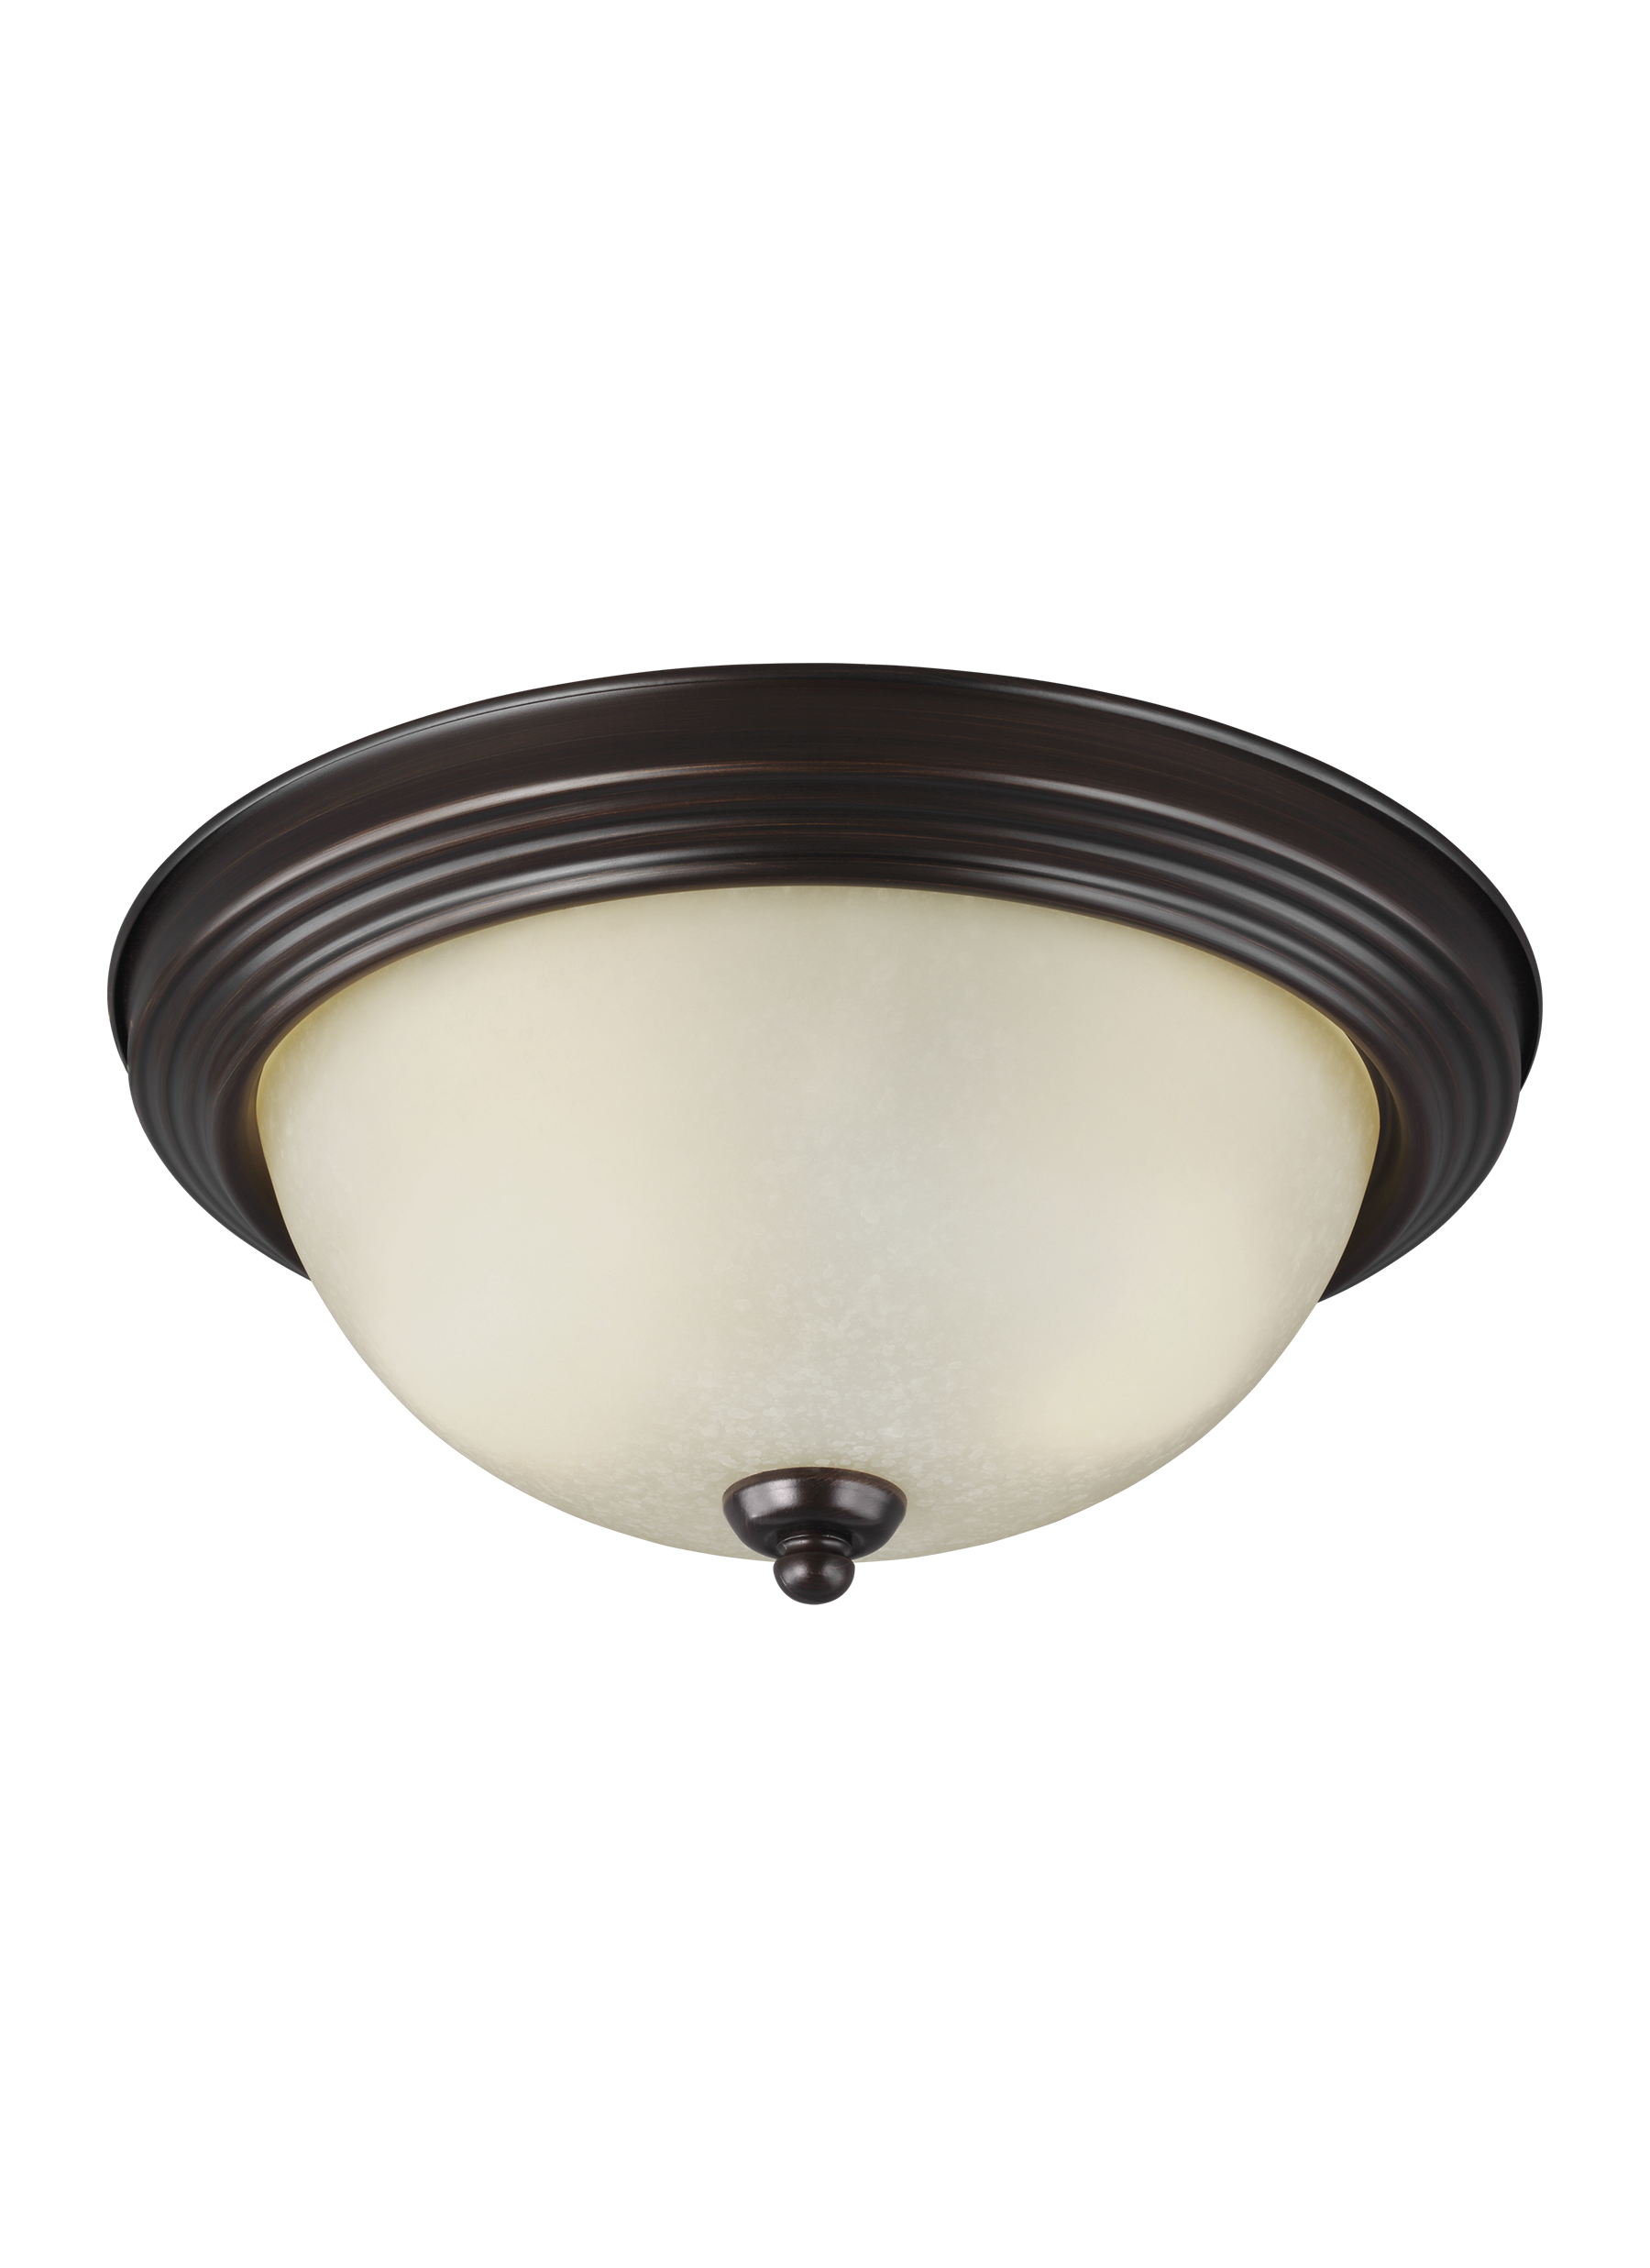 Geary transitional 2-light indoor dimmable ceiling flush mount fixture in bronze finish with amber scavo glass diffuser